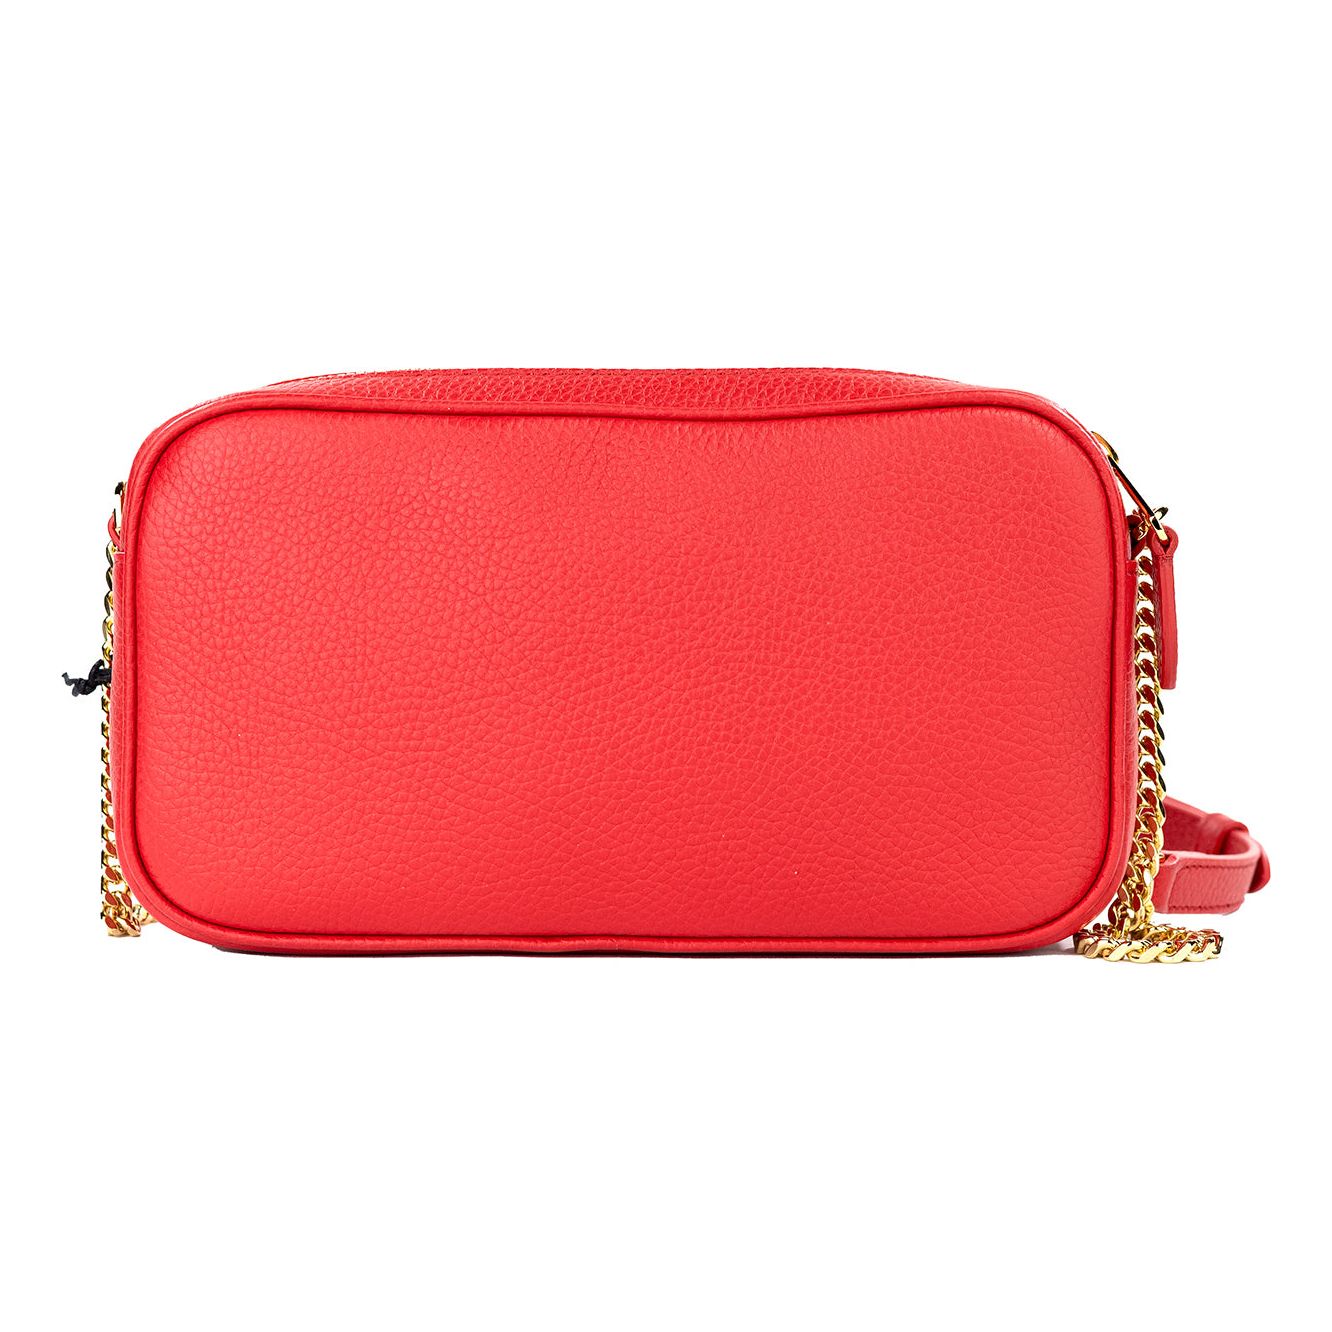 Small Red Pebbled Leather Elongated Camera Crossbody Bag Purse